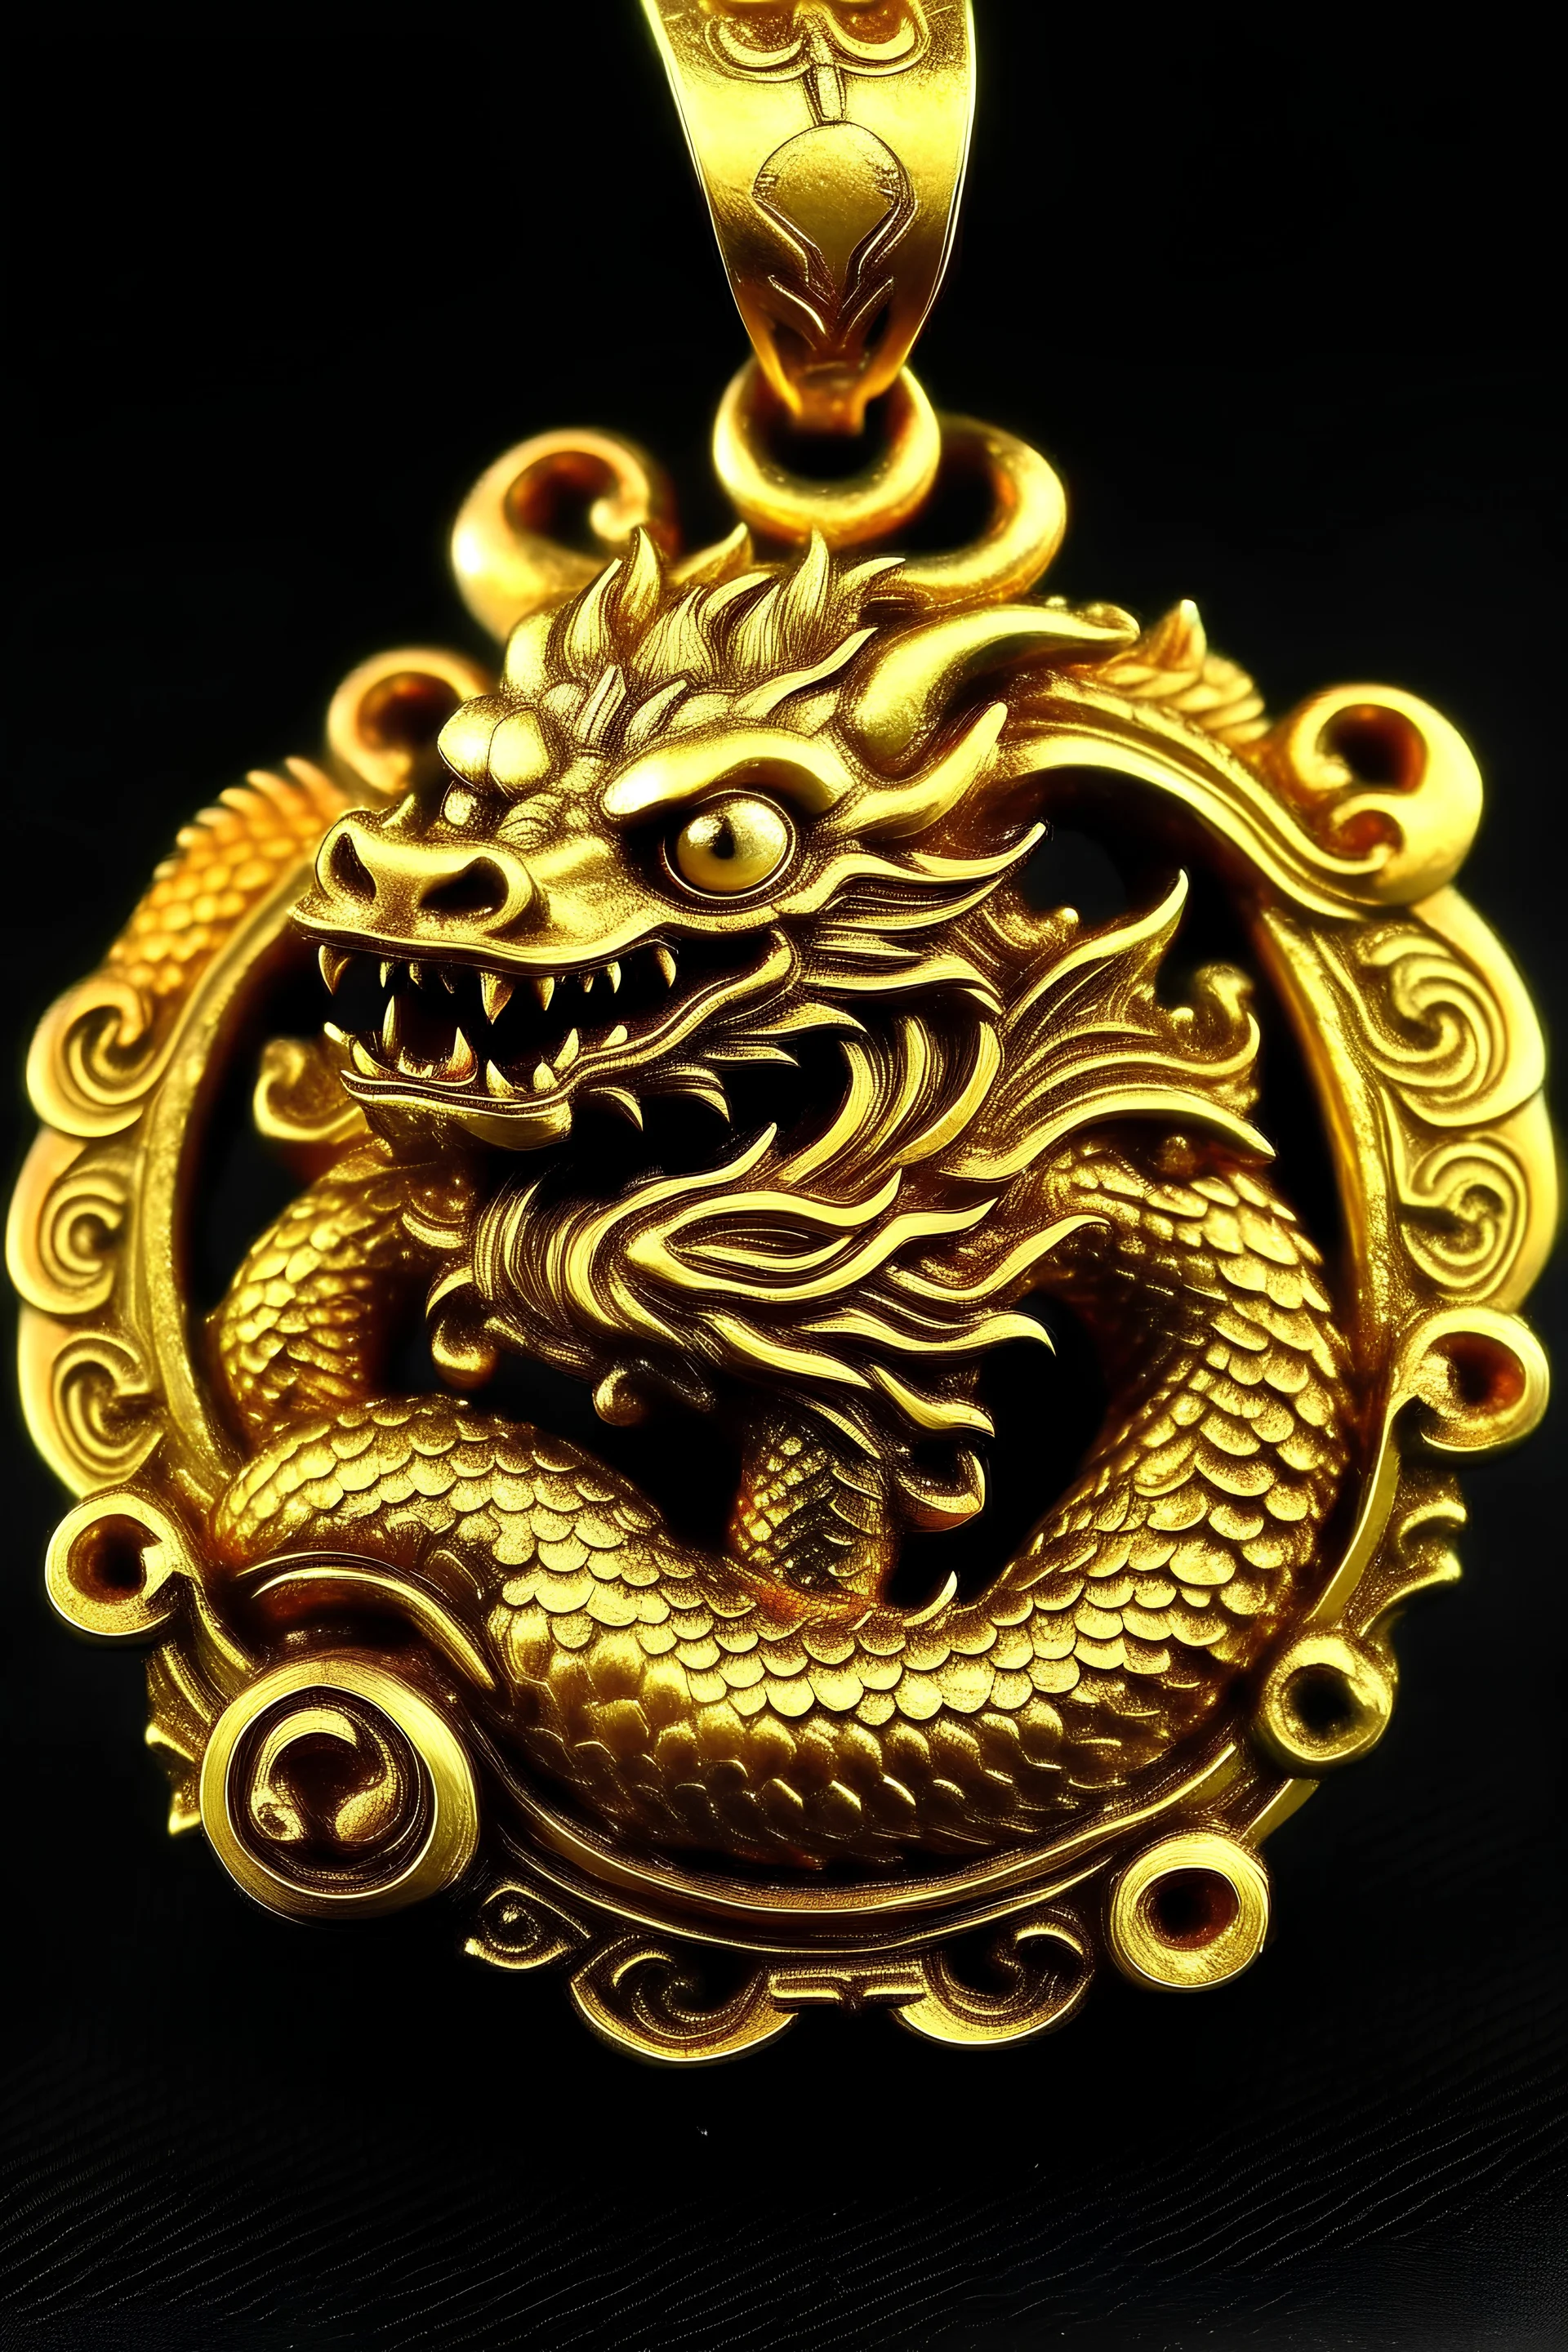 A Chinese gold old dragon pendant